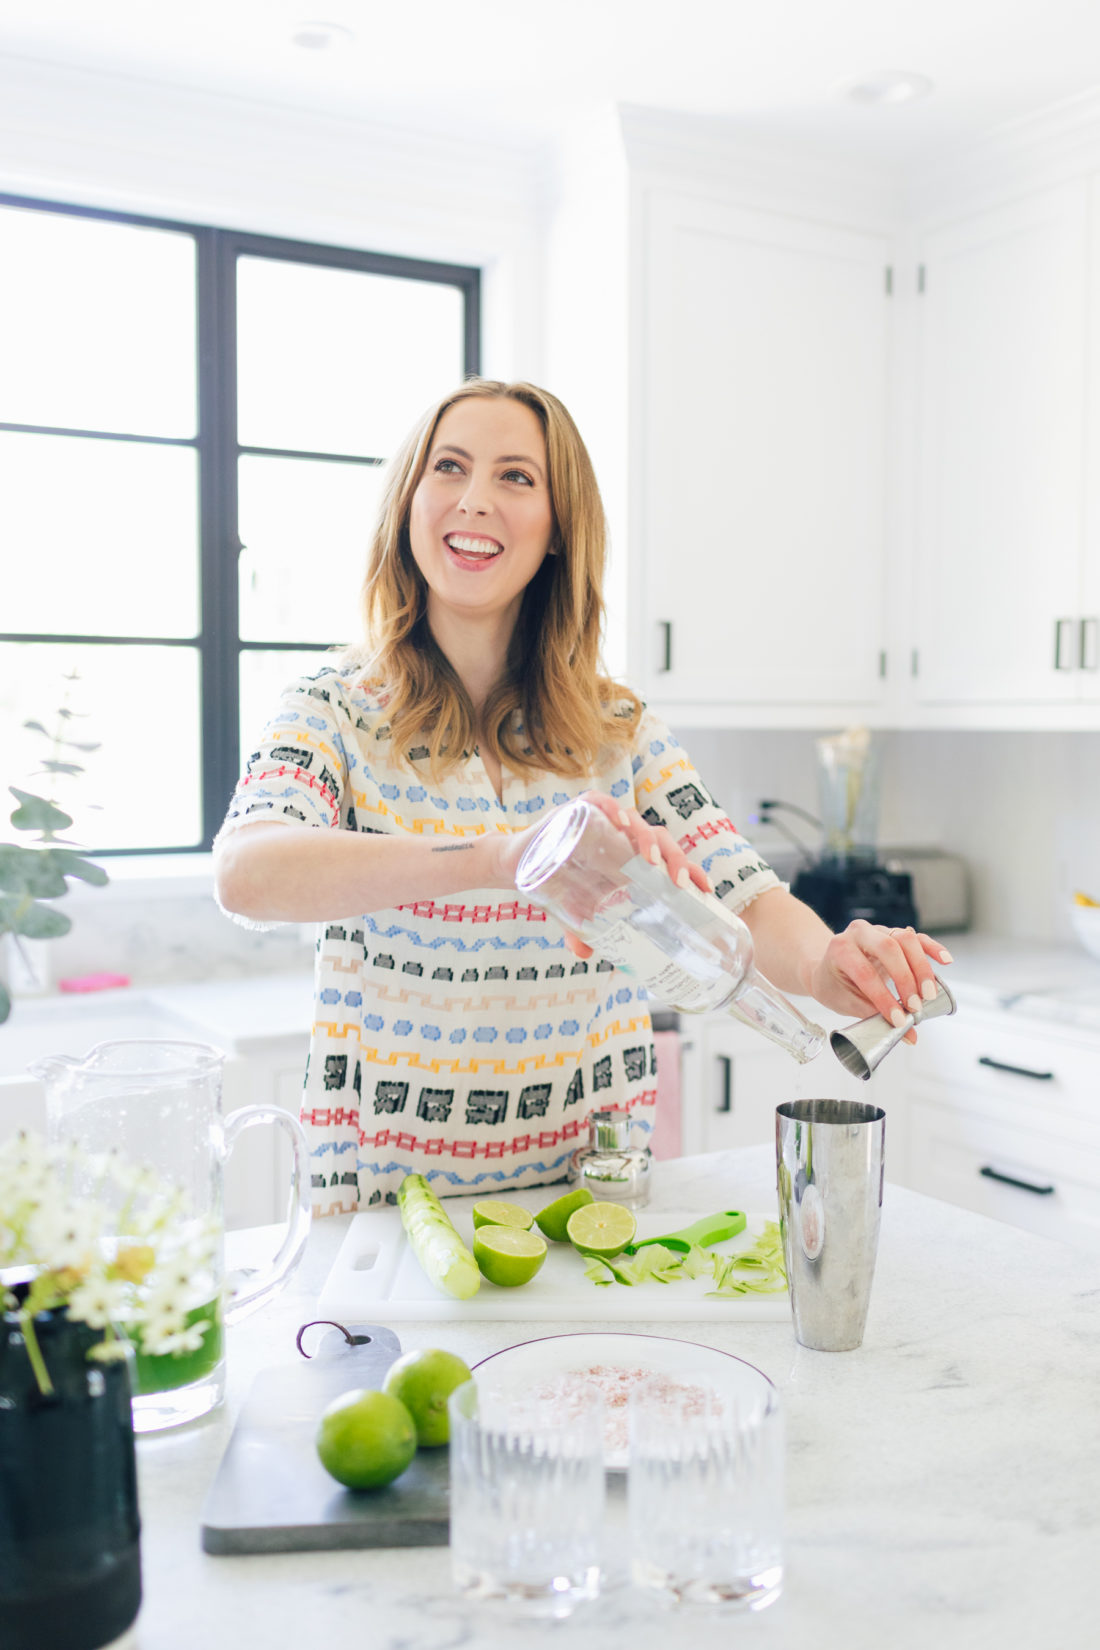 Eva Amurri Martino of Happily Eva After pour tequila into a cocktail shaker for cucumber margaritas